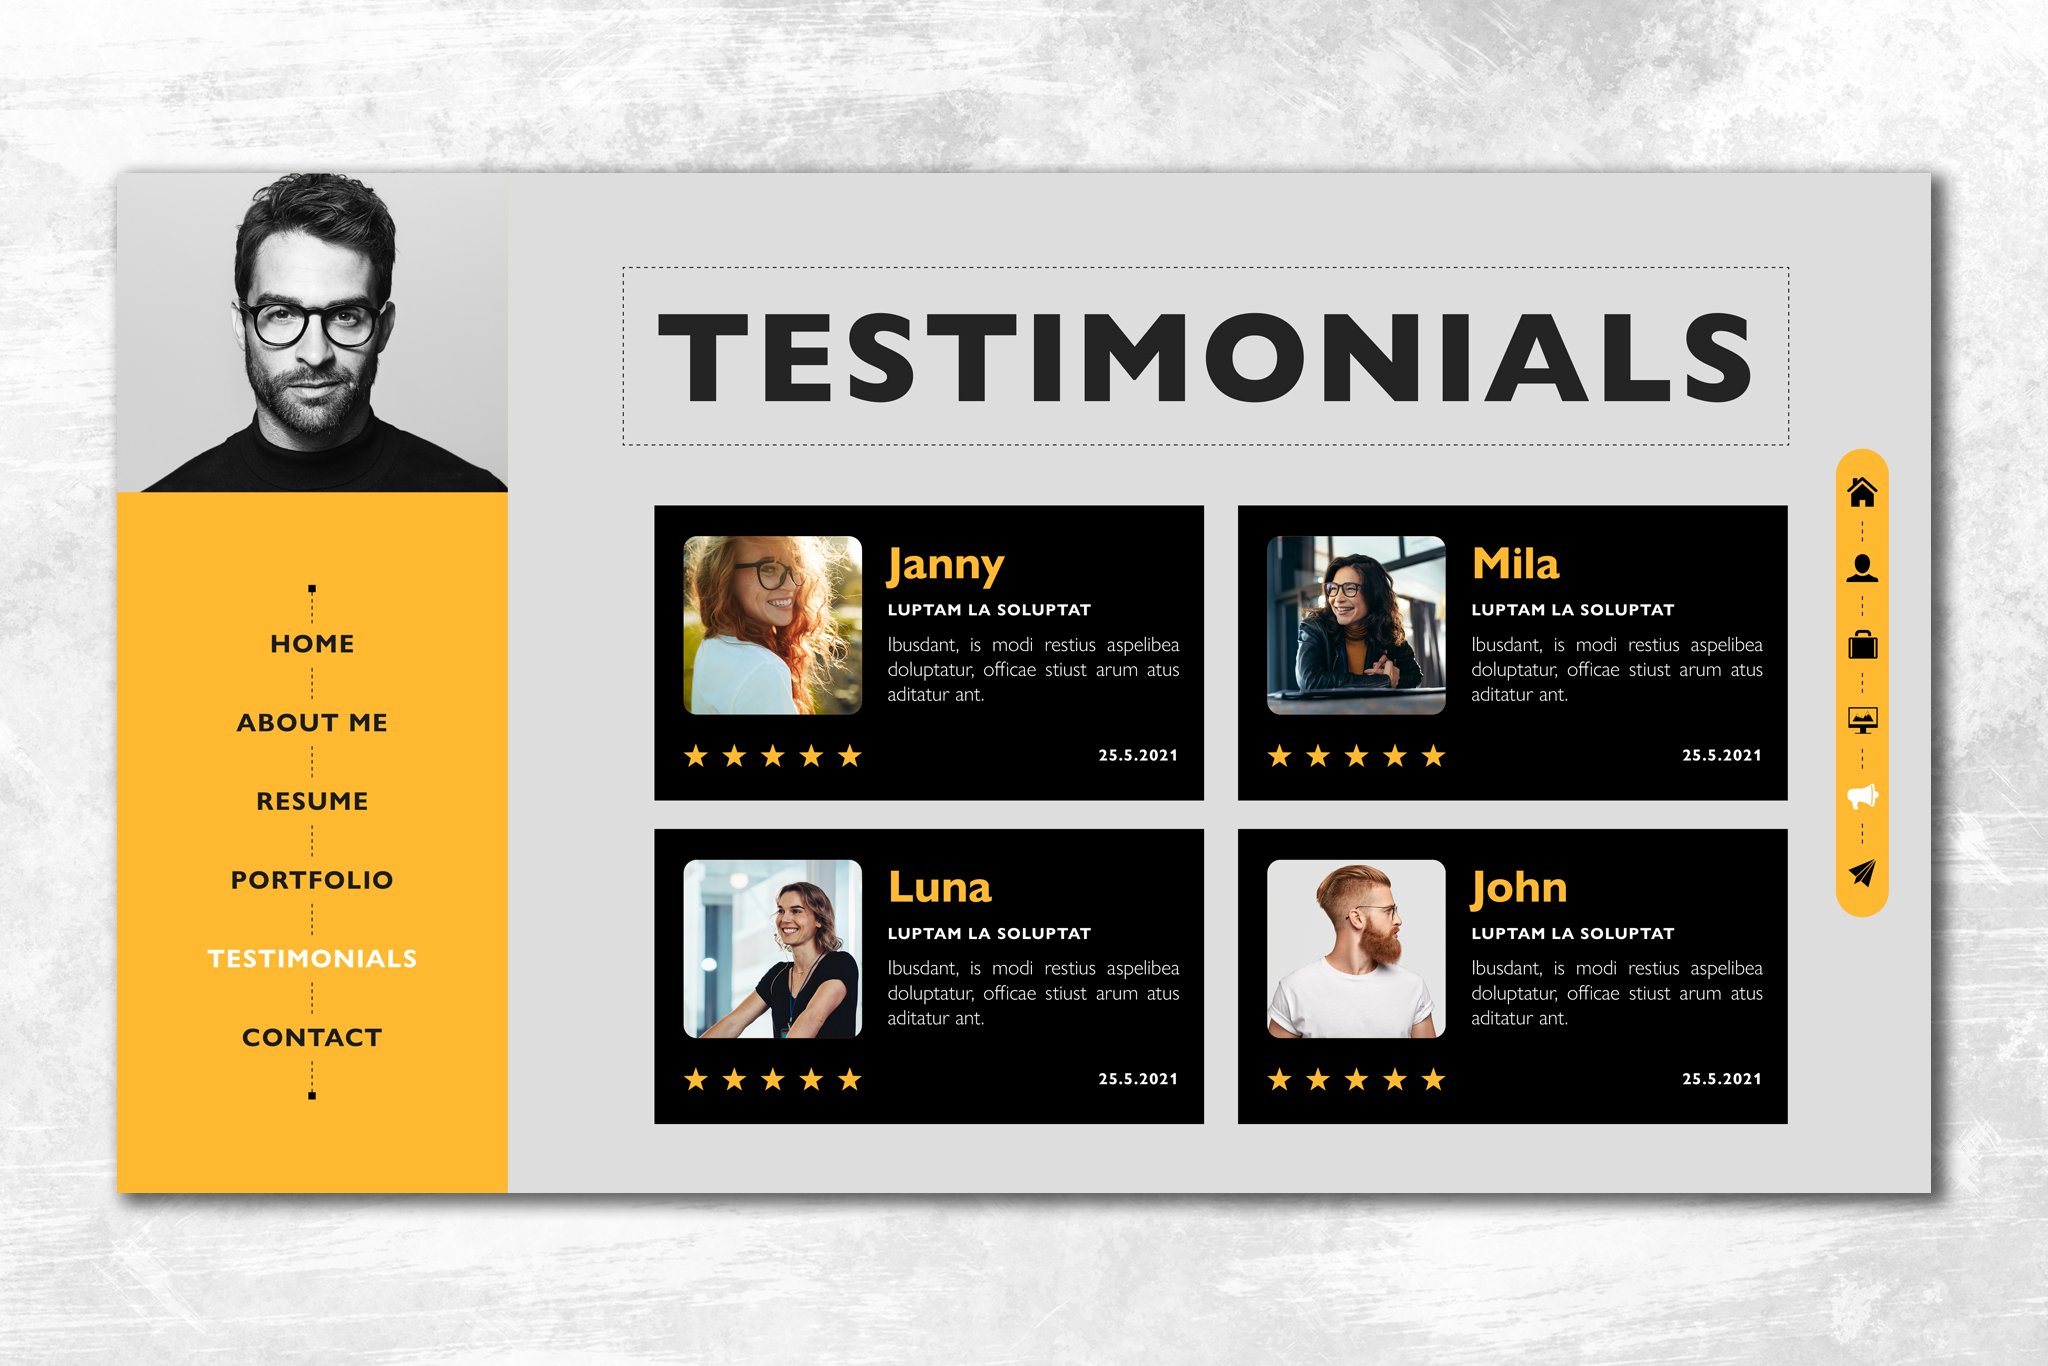 Yellow and black testimonias with a man's face.